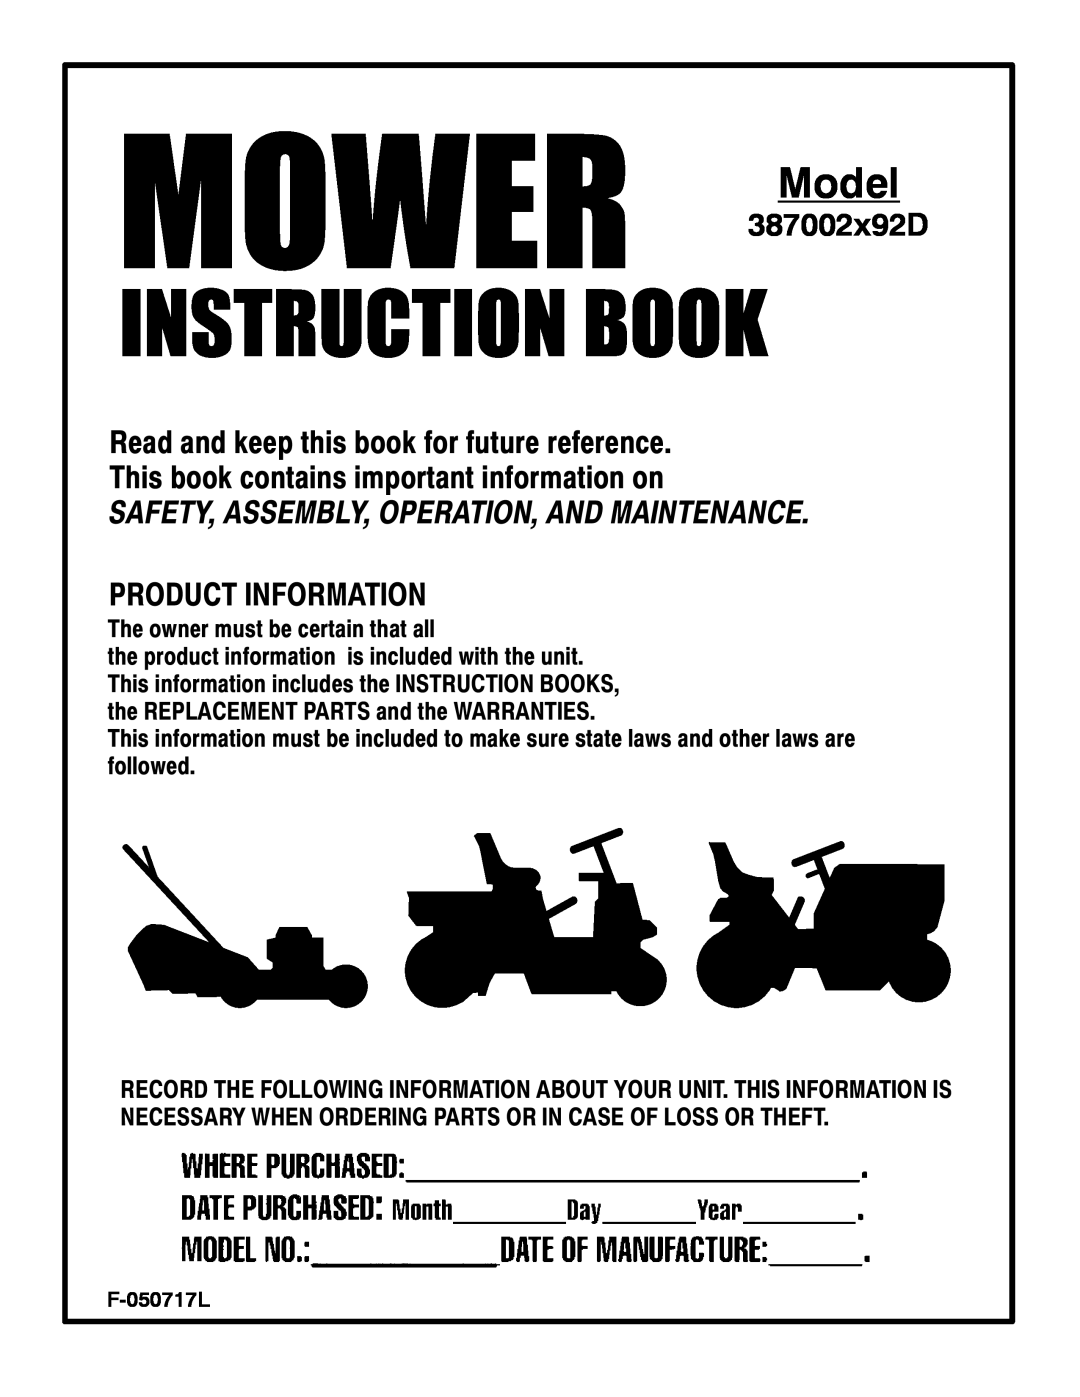 Murray 387002x92D manual Model, Read and keep this book for future reference, This book contains important information on 